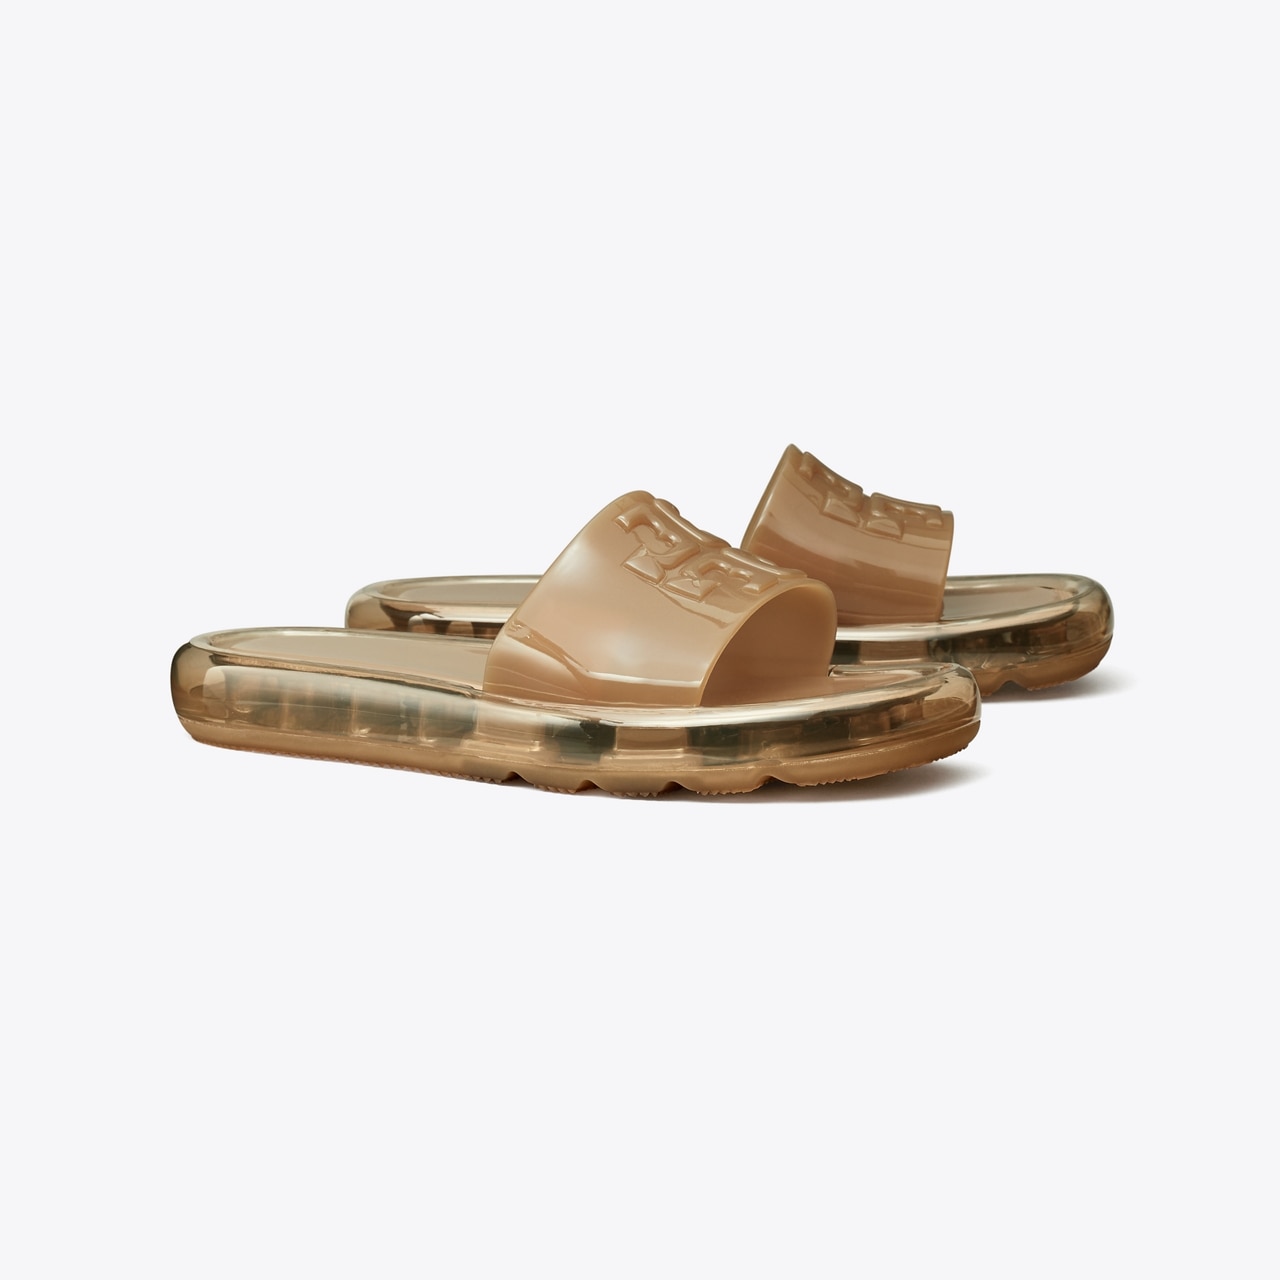 The Tory Burch jelly slides are basically adult jelly sandals